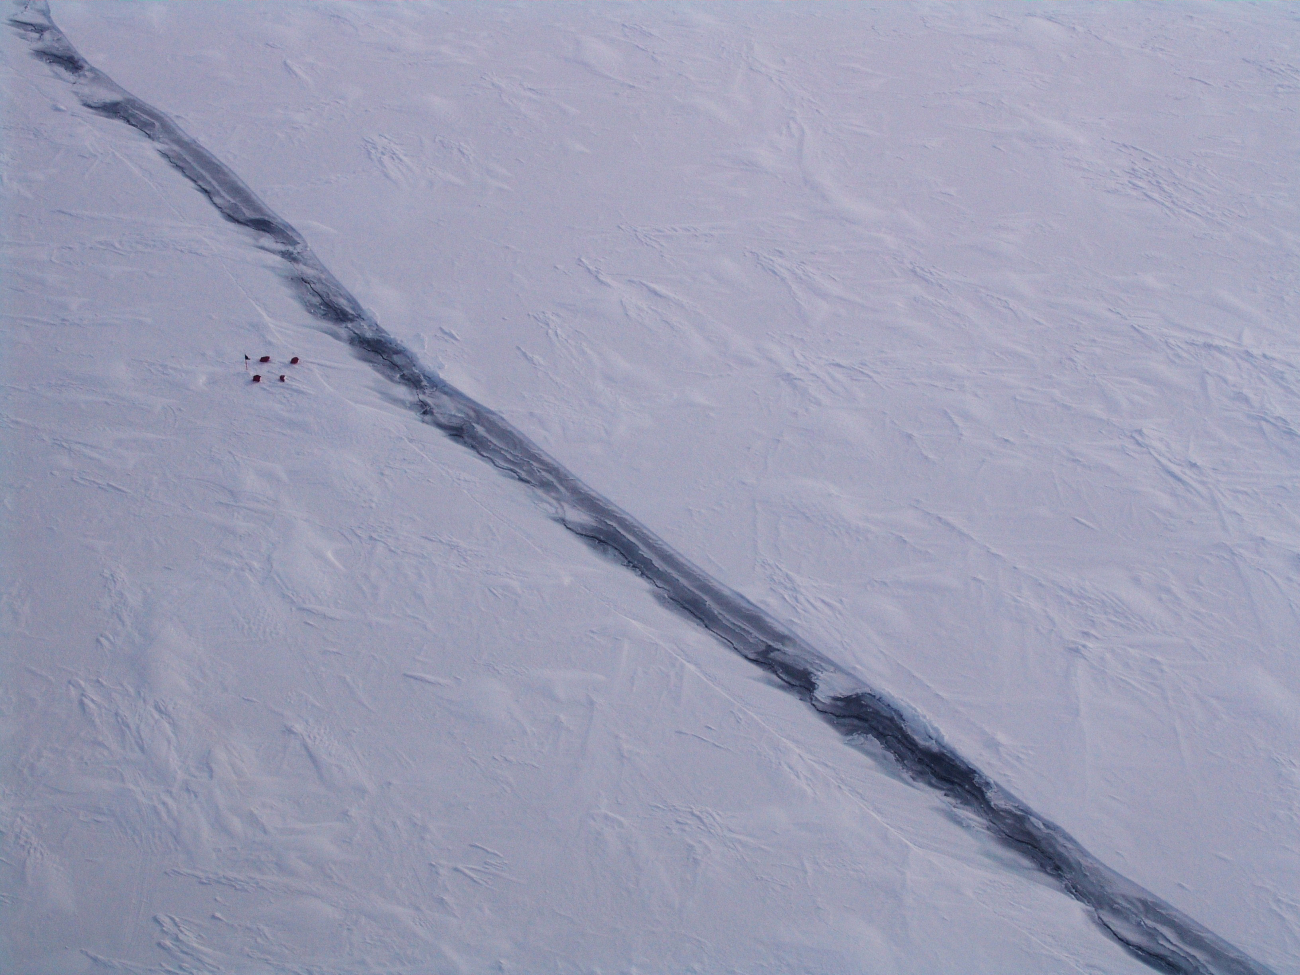 A fracture in the ice field